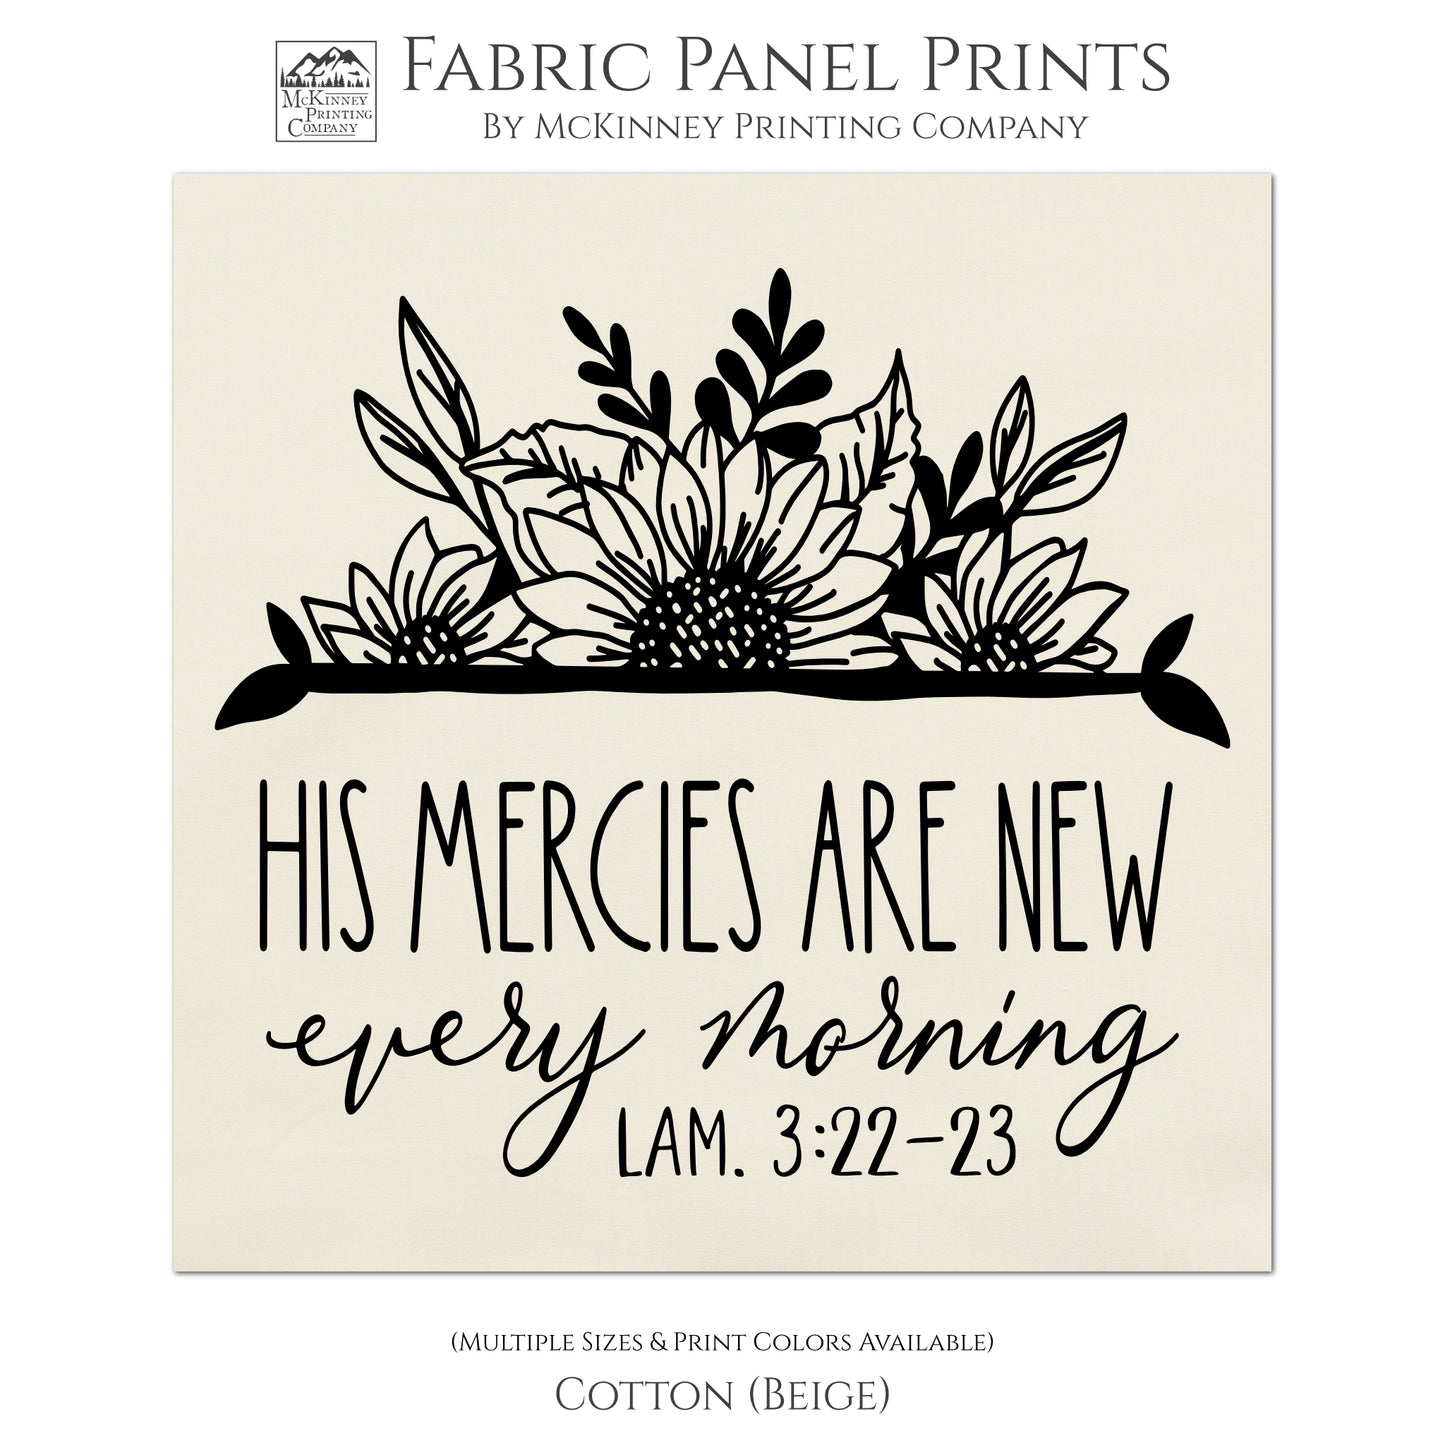 His mercies are new every morning - Lamentations 3 22, Quotes About Life, Inspirational, Religious Fabric, Christian Scripture, Fabric Panel Print, Quilt Block - Cotton